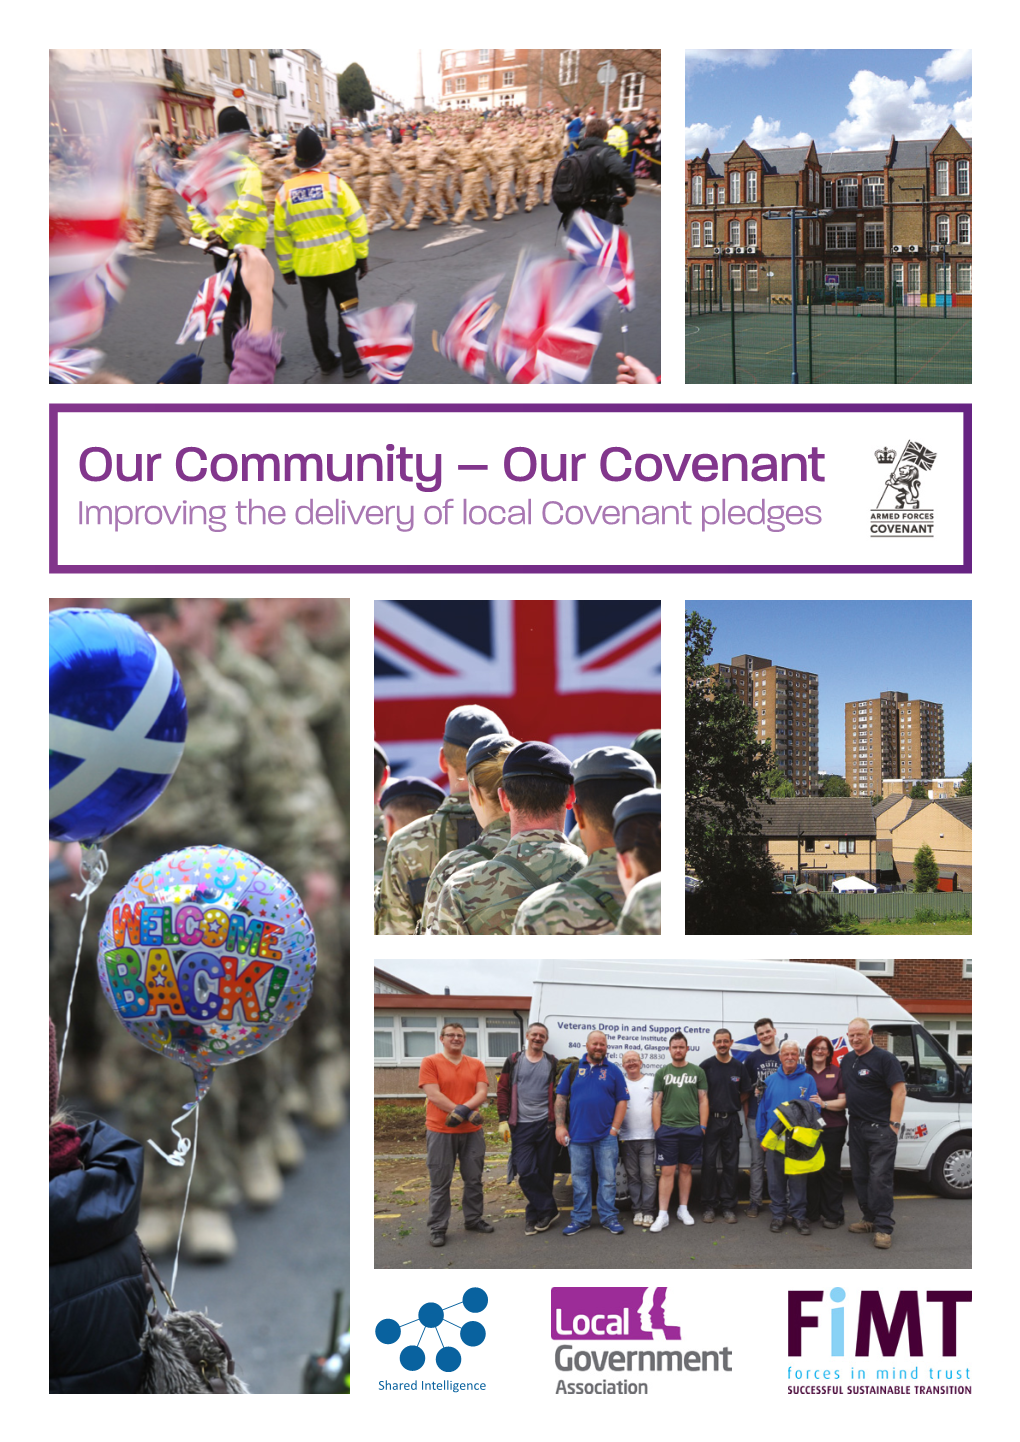 Our Community – Our Covenant Improving the Delivery of Local Covenant Pledges